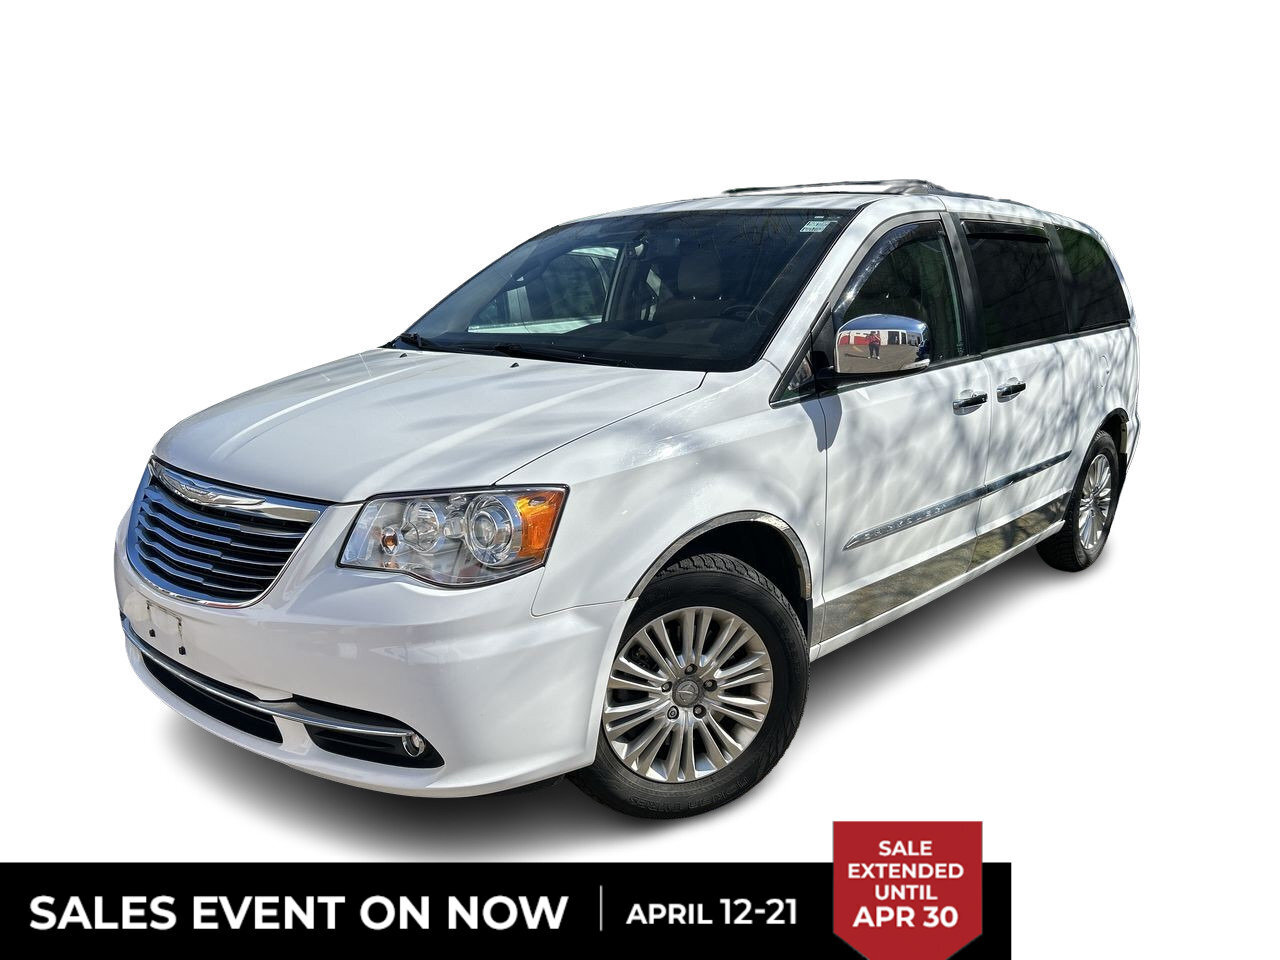 2015 Chrysler Town & Country 4dr Wgn Limited